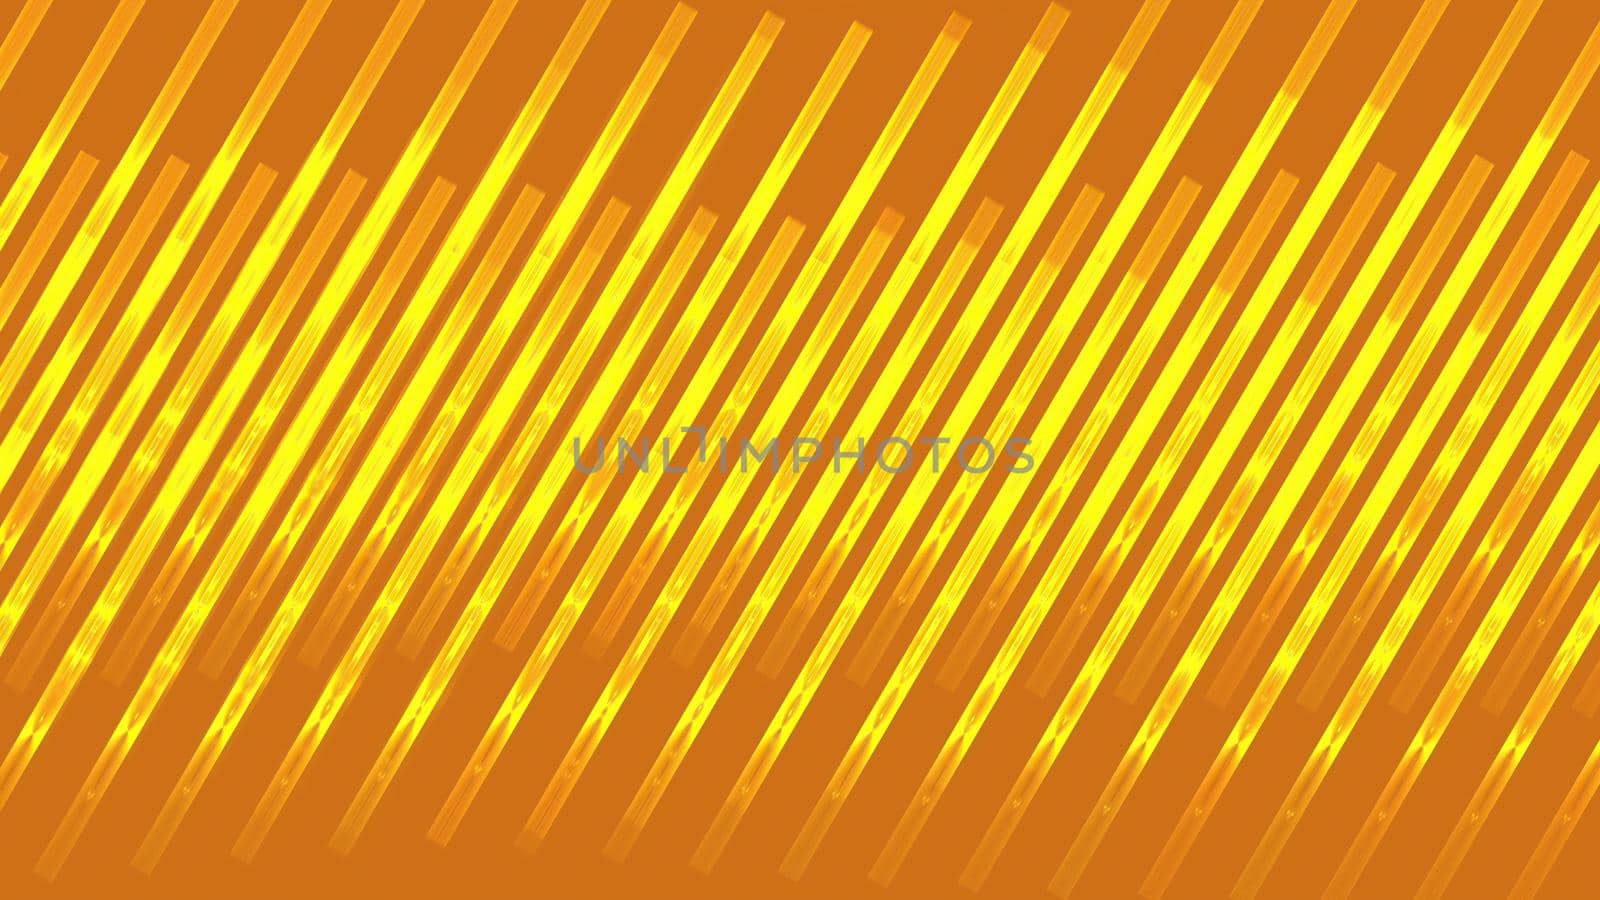 3d illustration - Unique Design of Abstract Colorful  striped surface by vitanovski